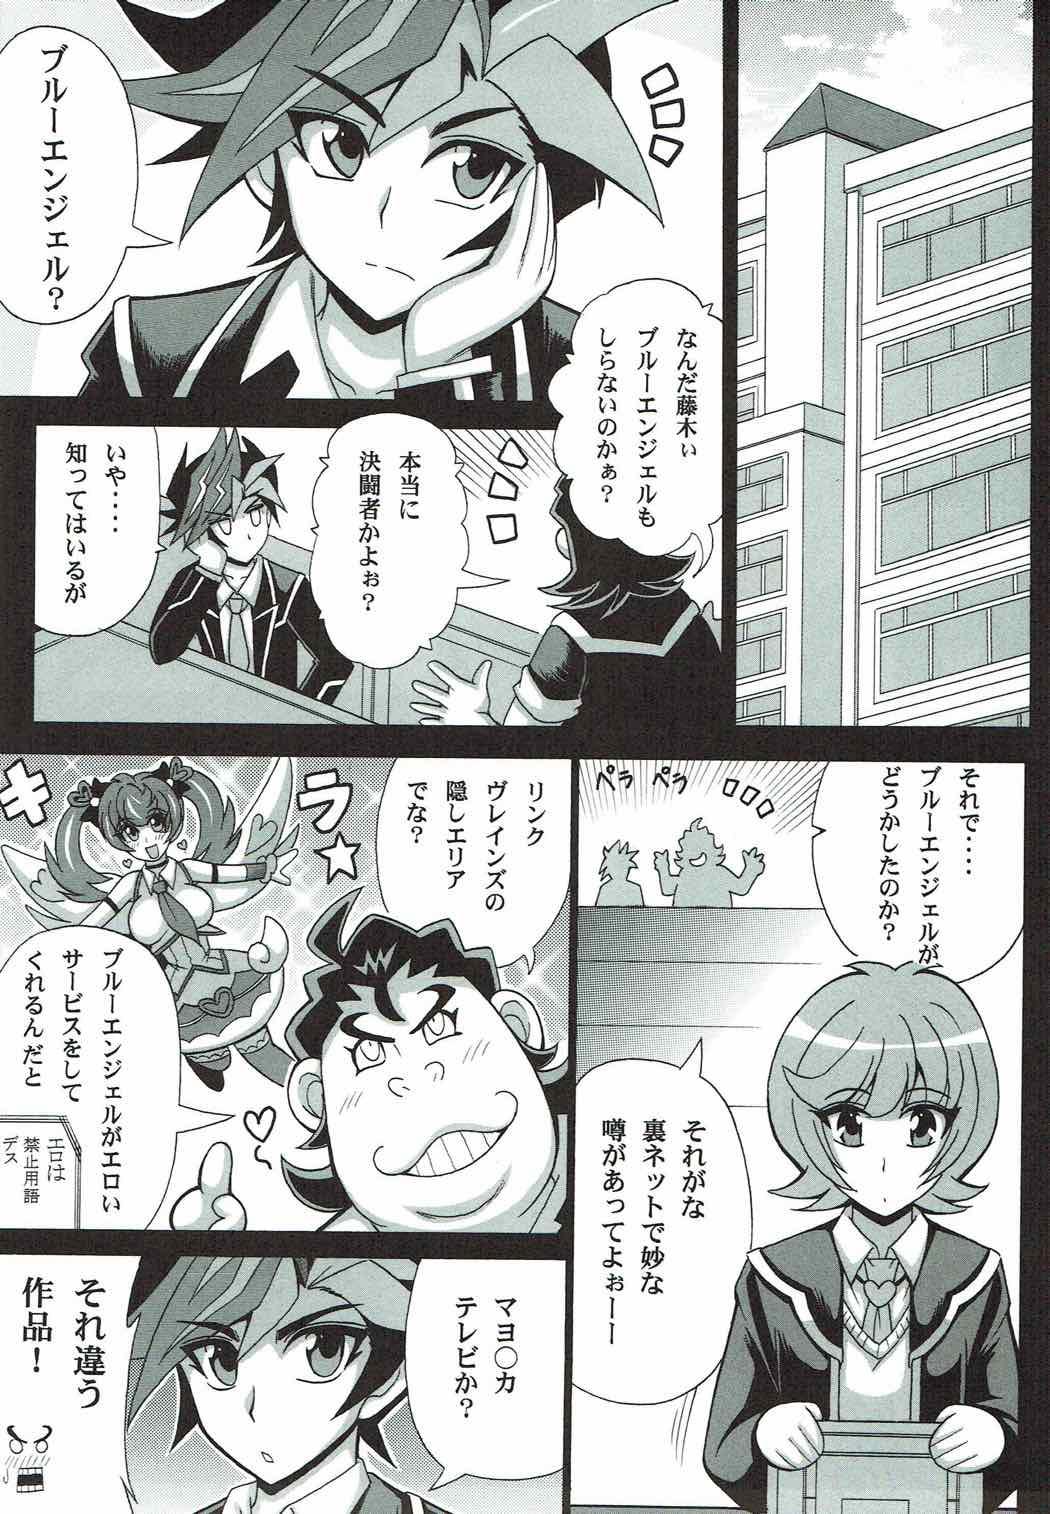 Hermosa BLUE VRAINS - Yu-gi-oh Yu-gi-oh vrains Hot Fuck - Page 2